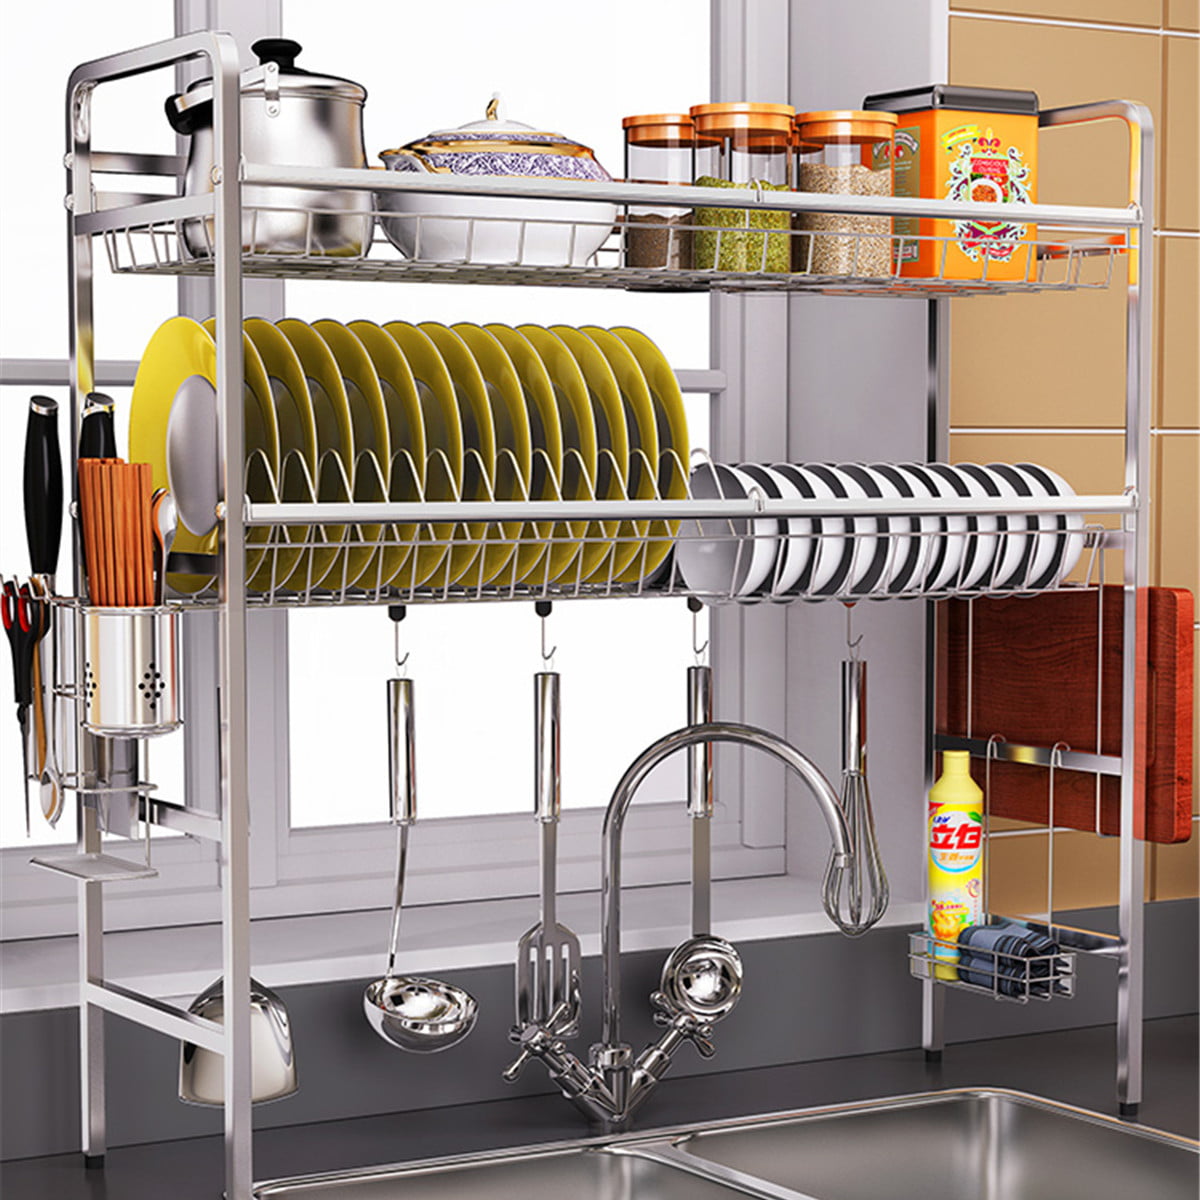 304 Stainless Steel 2 Tier Dish Drying Rack Over Sink Drainer Shelf 2 Tier Stainless Steel Dish Rack